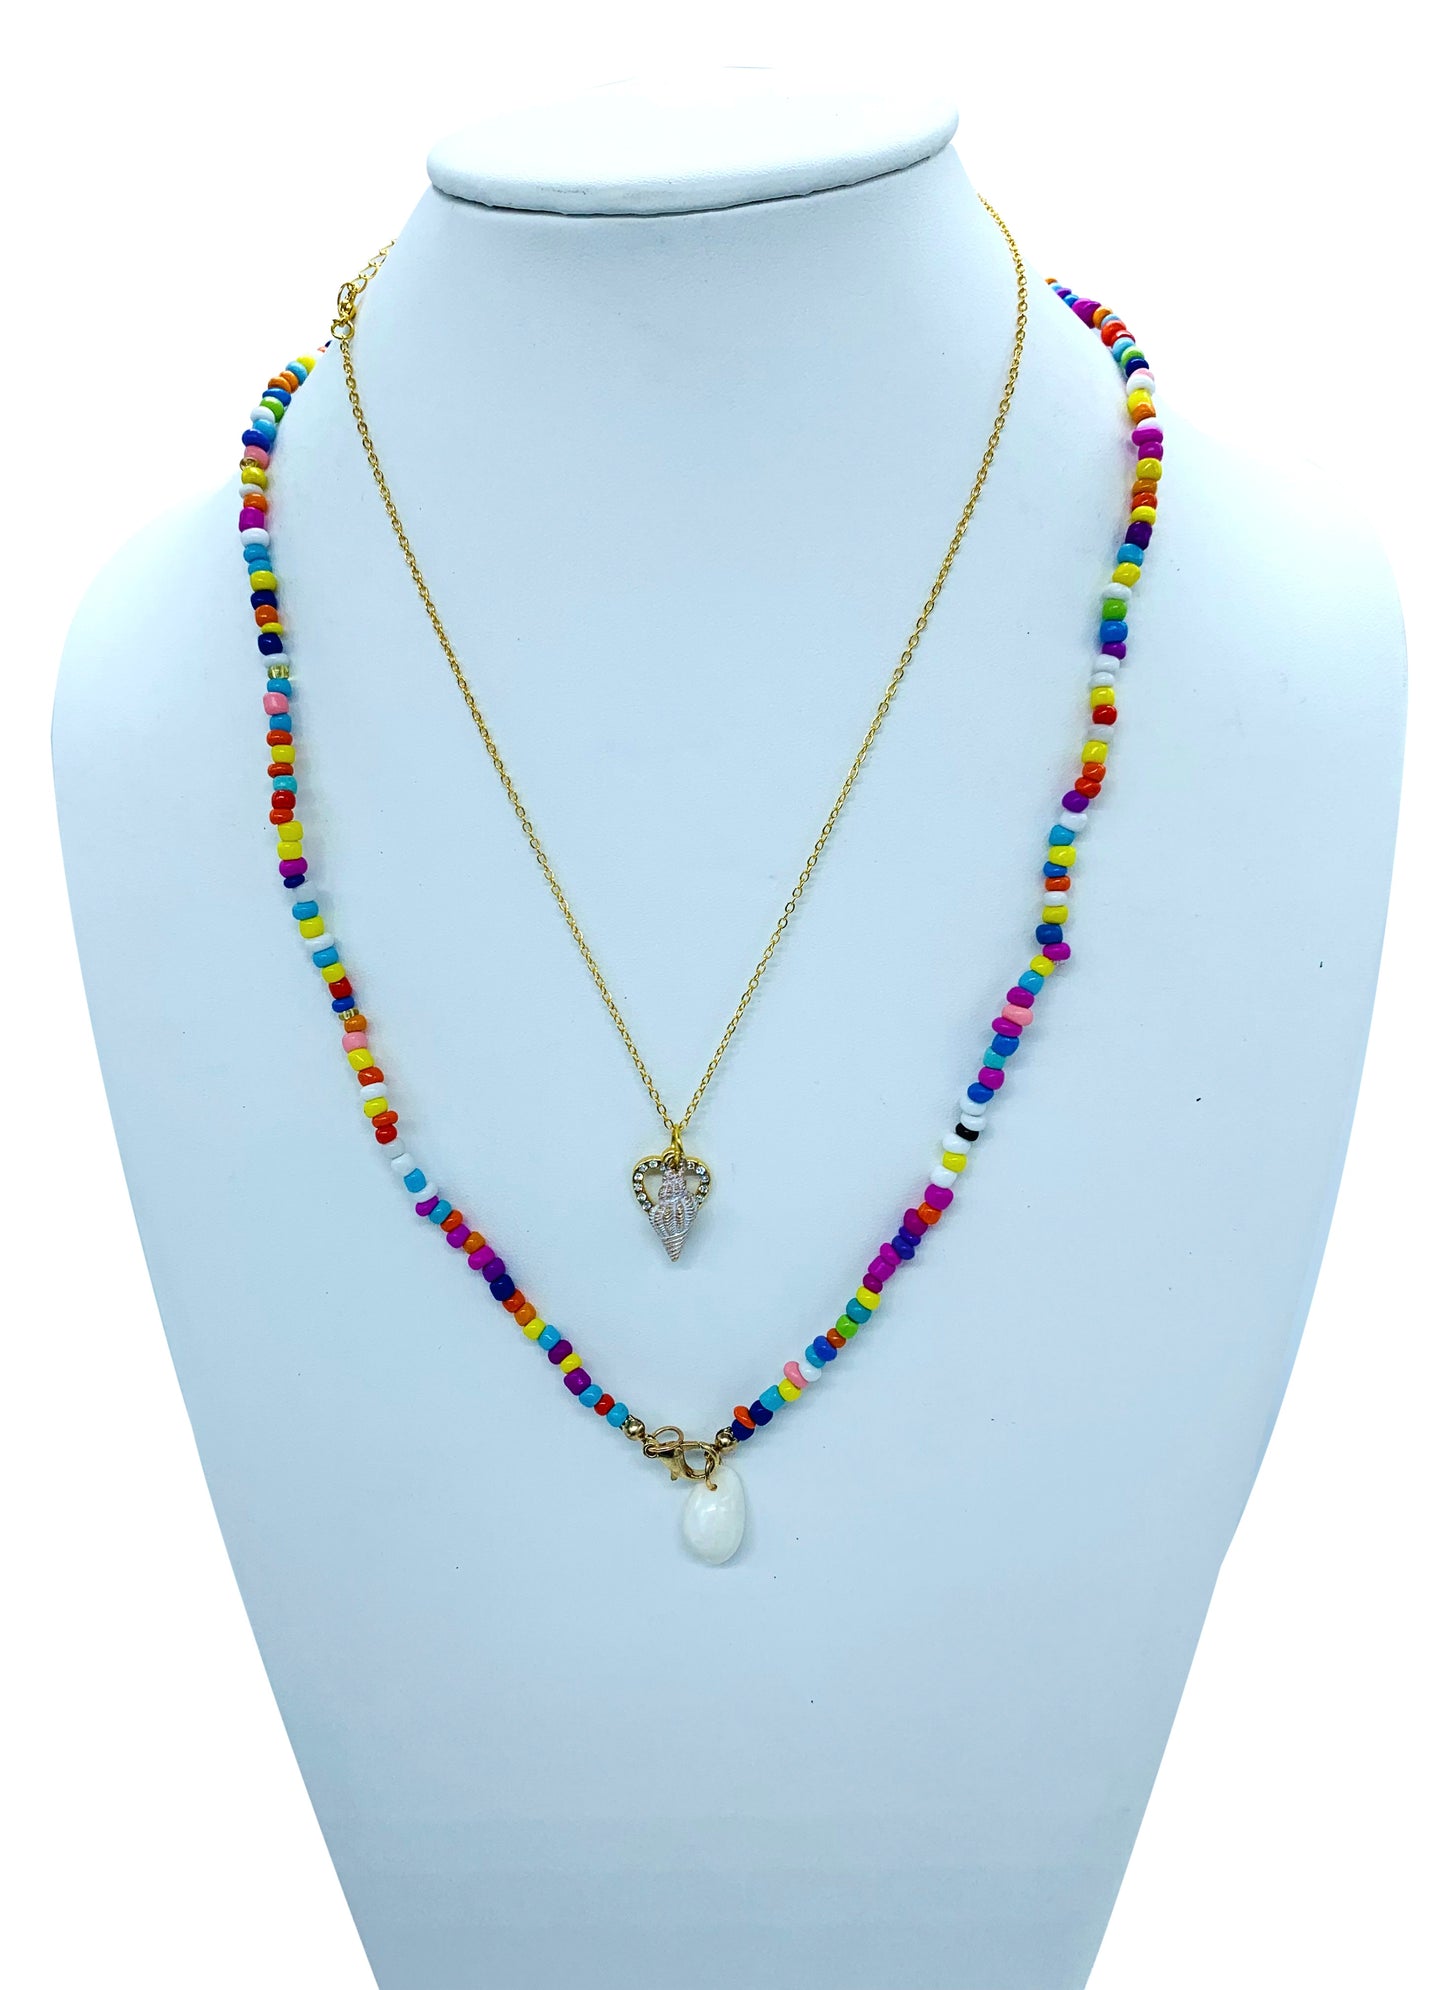 Kathy Layered Necklace